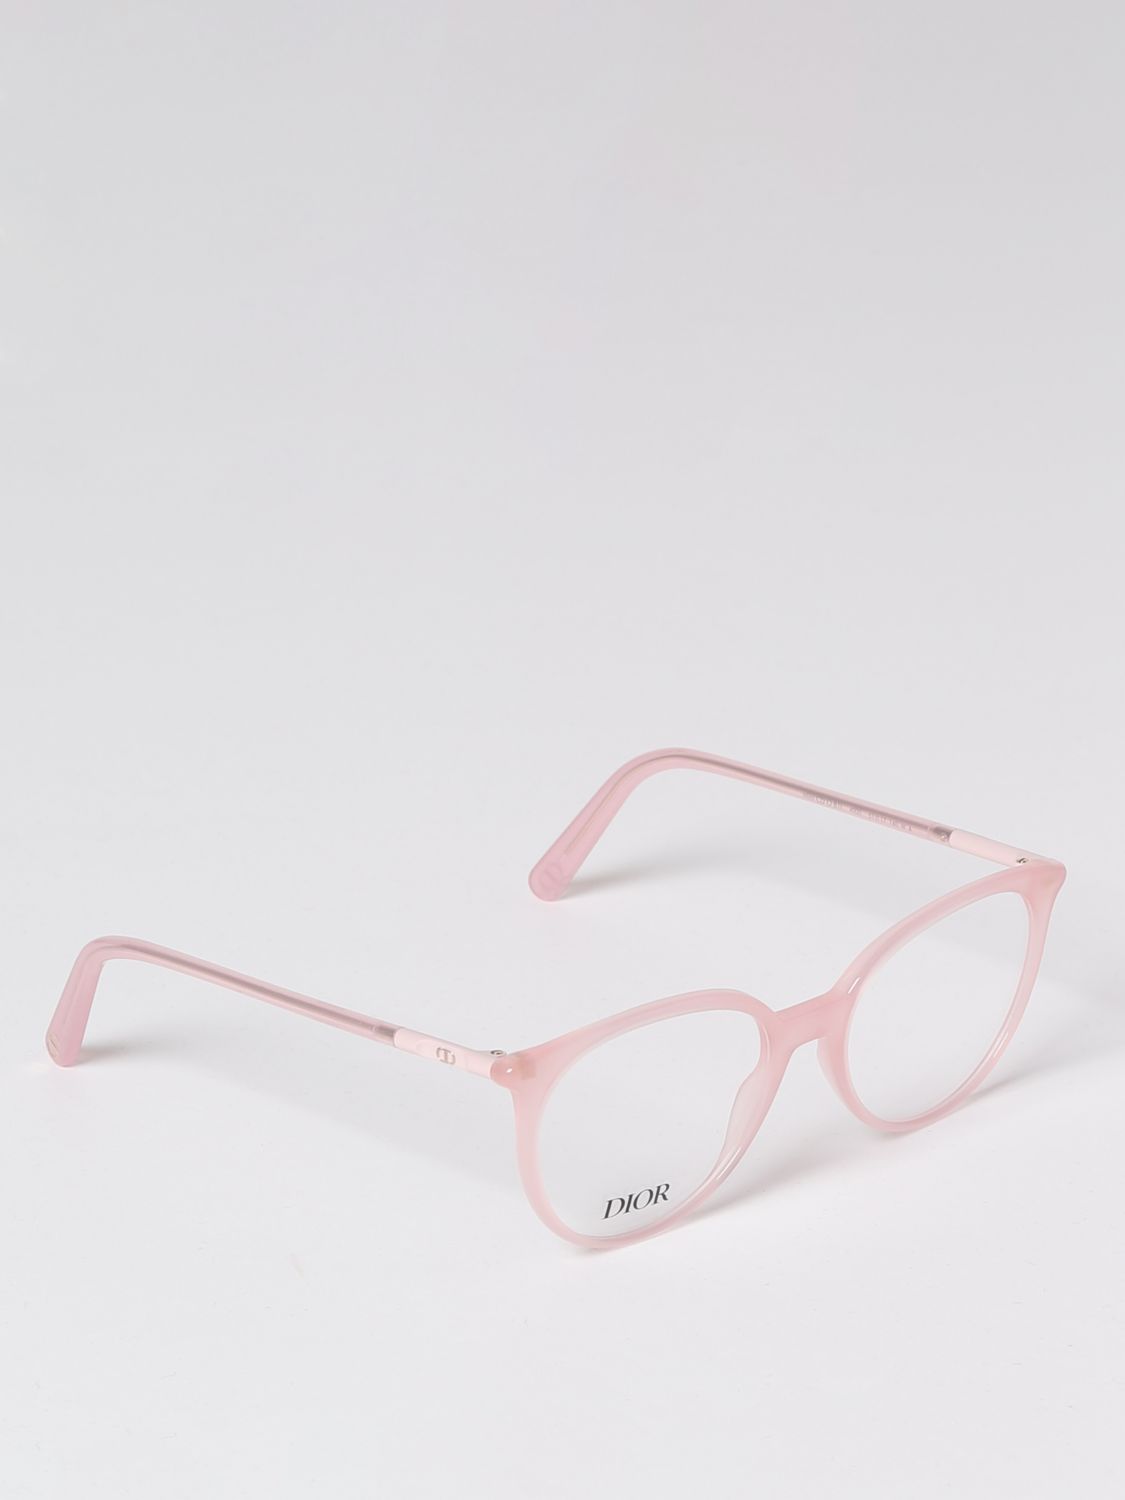 New Dior Glasses Collection 2022 2023  Visiofactory